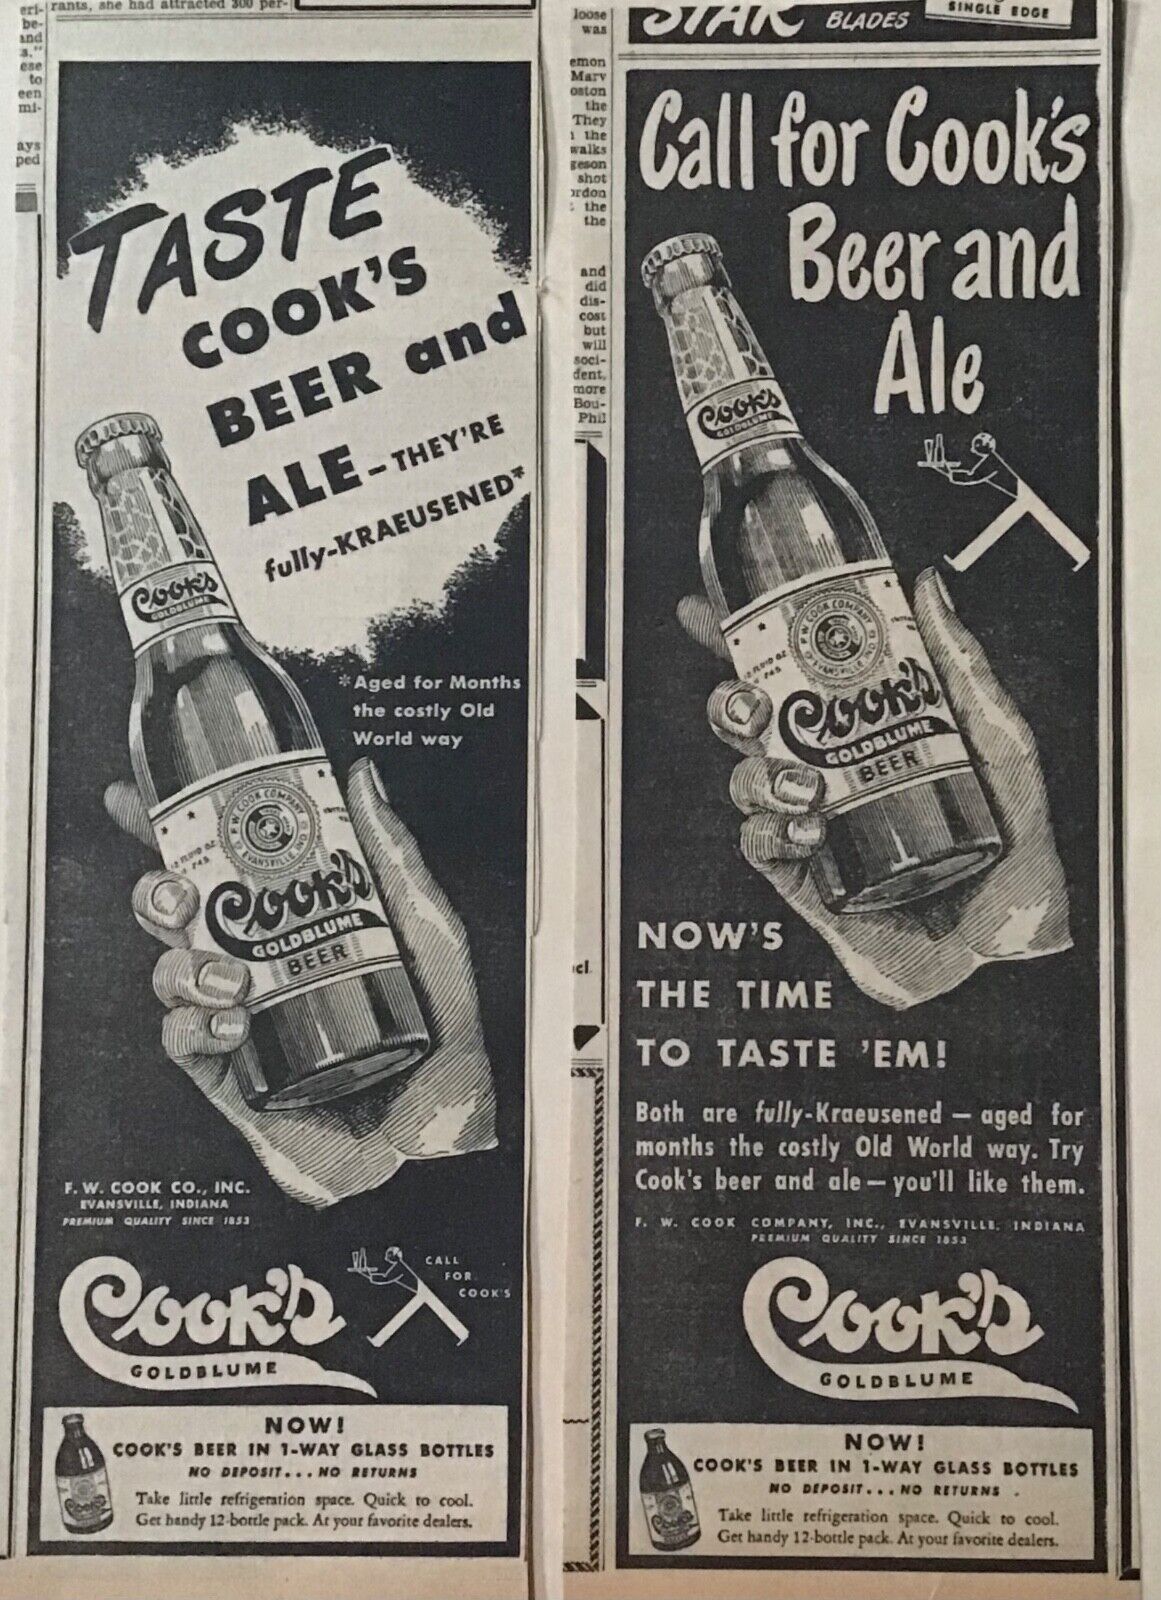 2 large 1948 newspaper ads for Cook\'s Beer & Ale - They\'re fully-KRAUSENED, aged